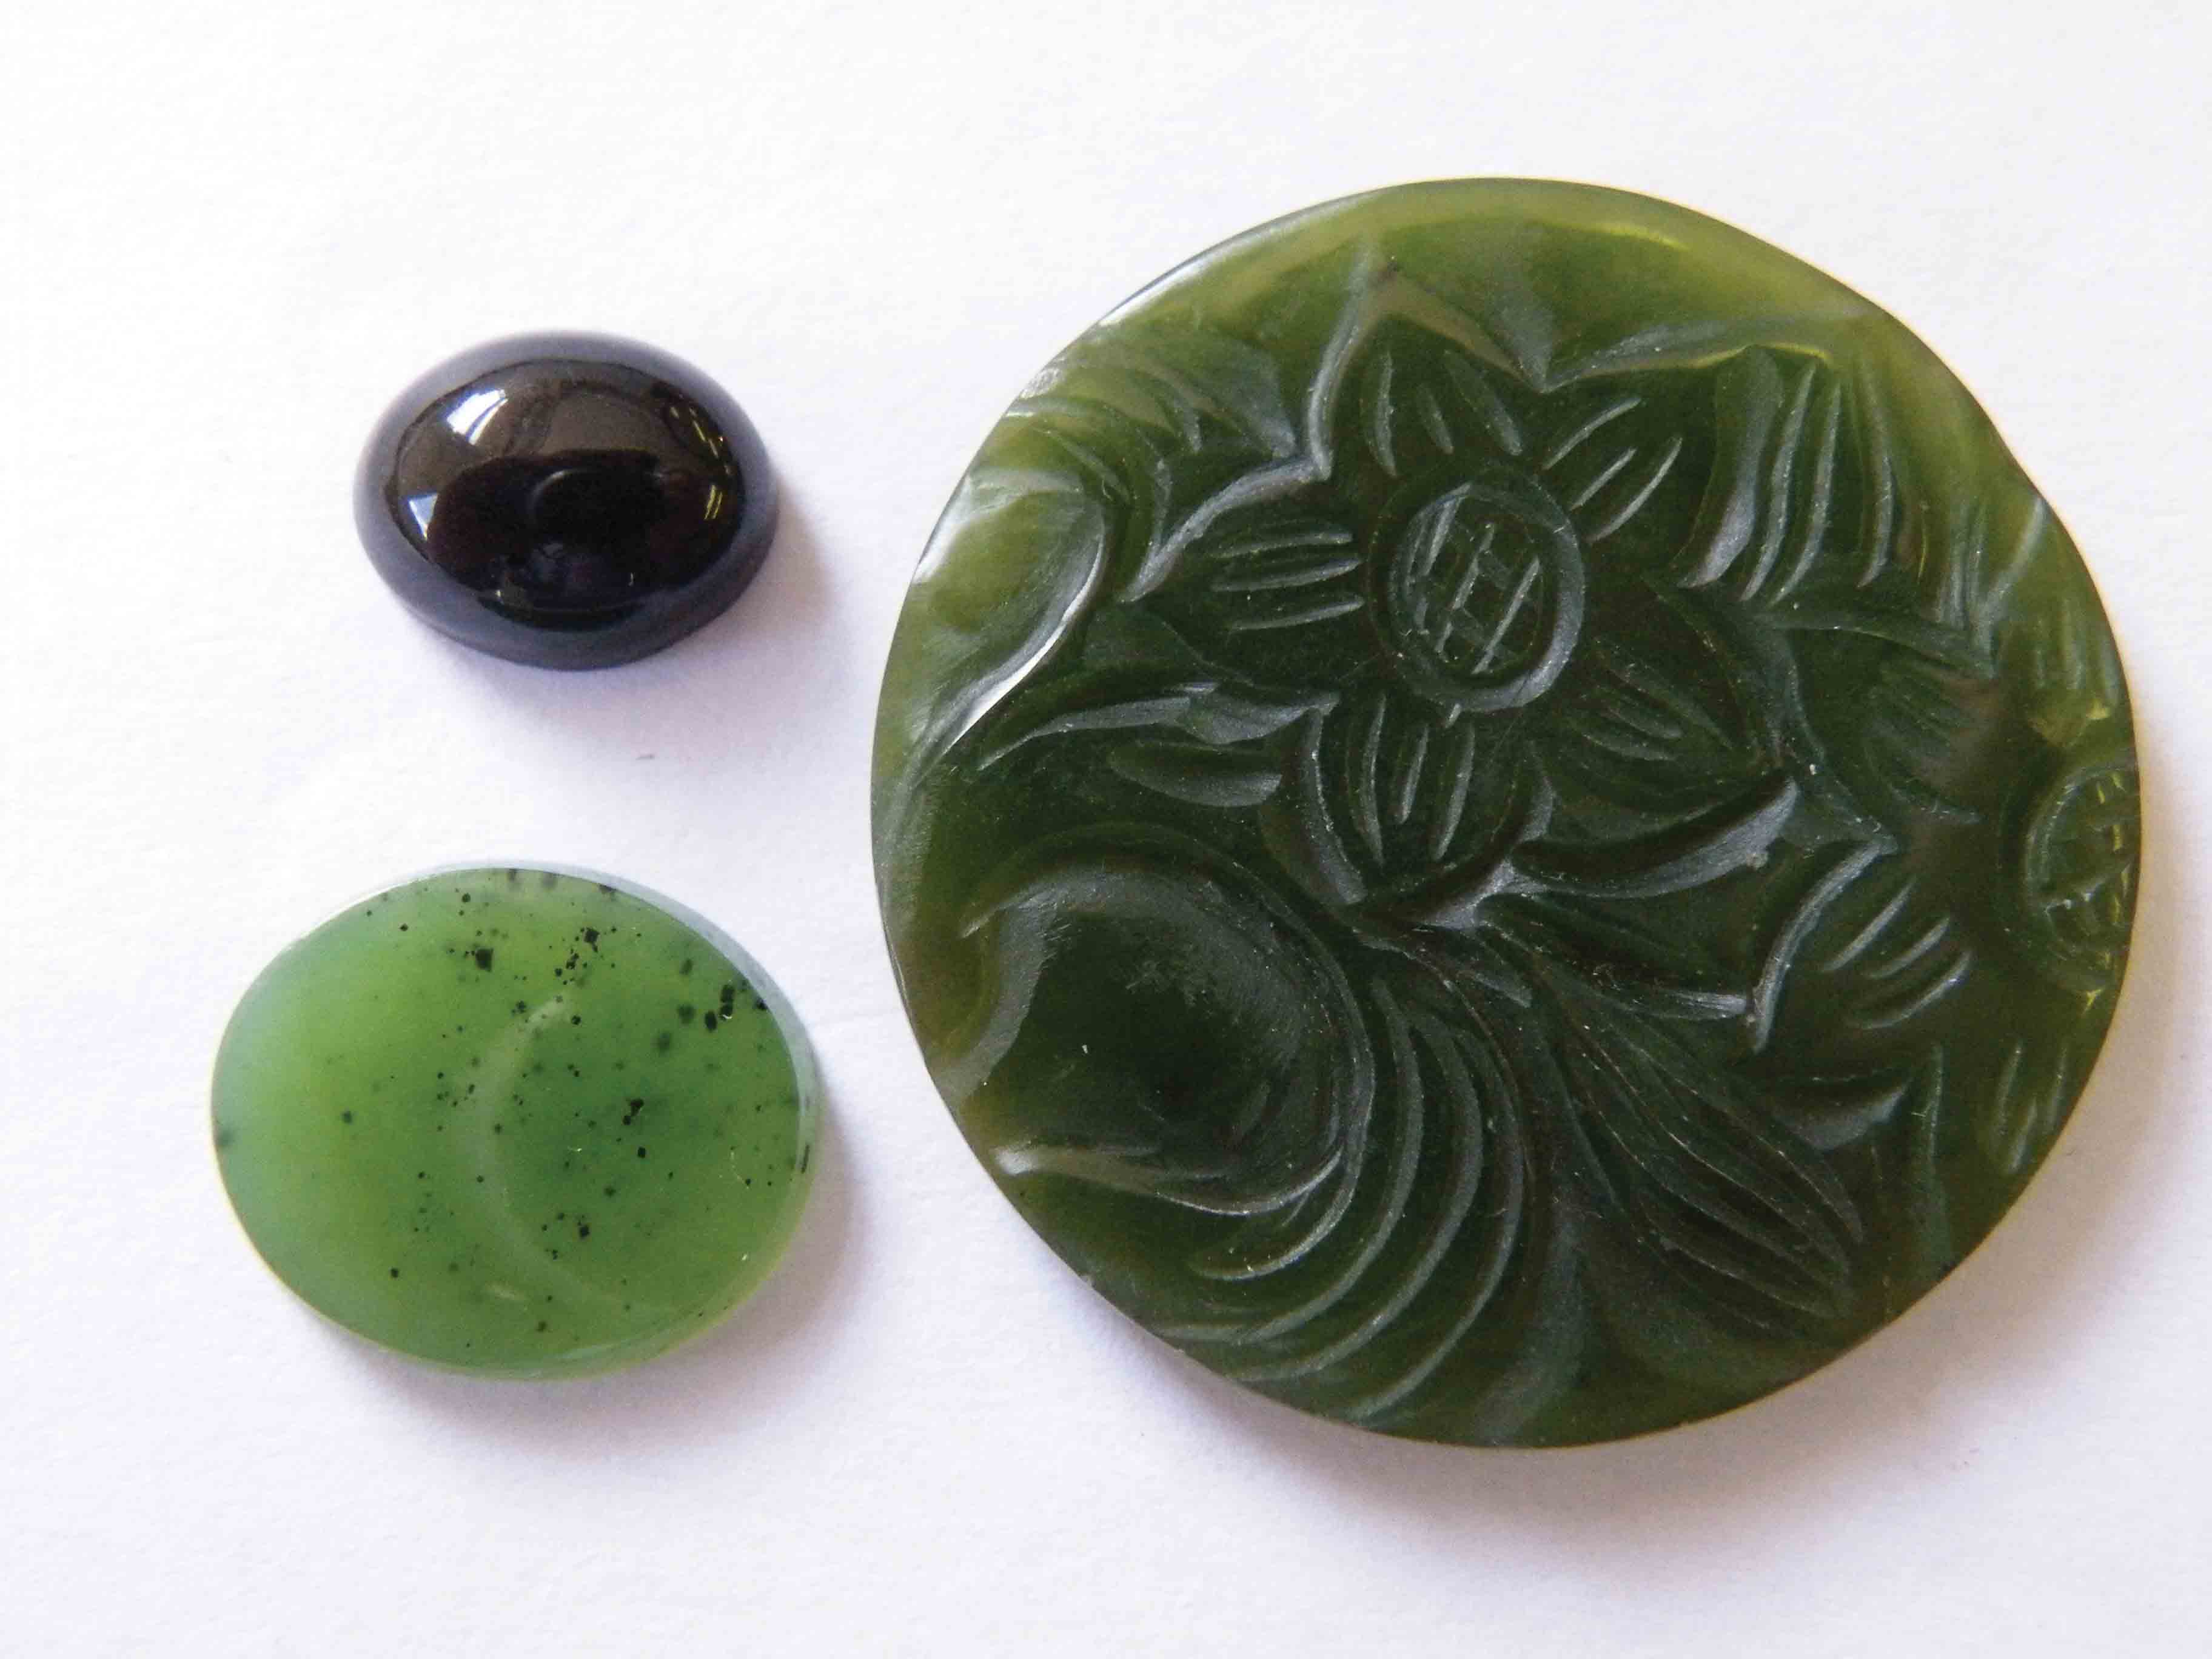 Common Mistakes: The Pitfalls Many New Gemmologists Encounter - - Jade Nephrite 1830 PD